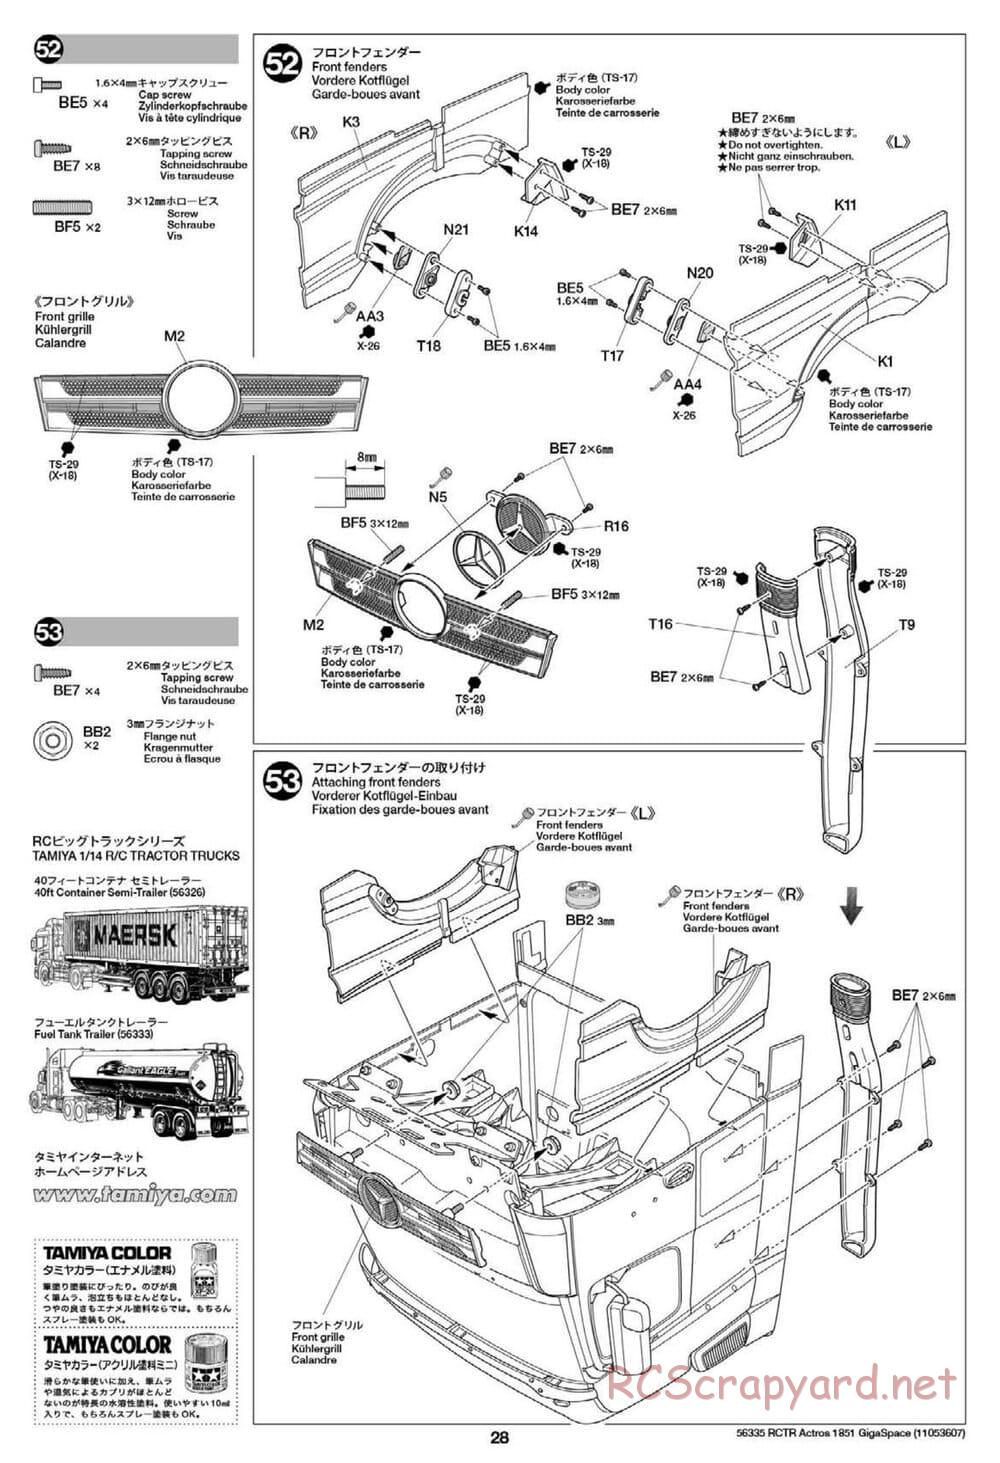 Tamiya - Mercedes-Benz Actros 1851 Gigaspace Tractor Truck Chassis - Manual - Page 28